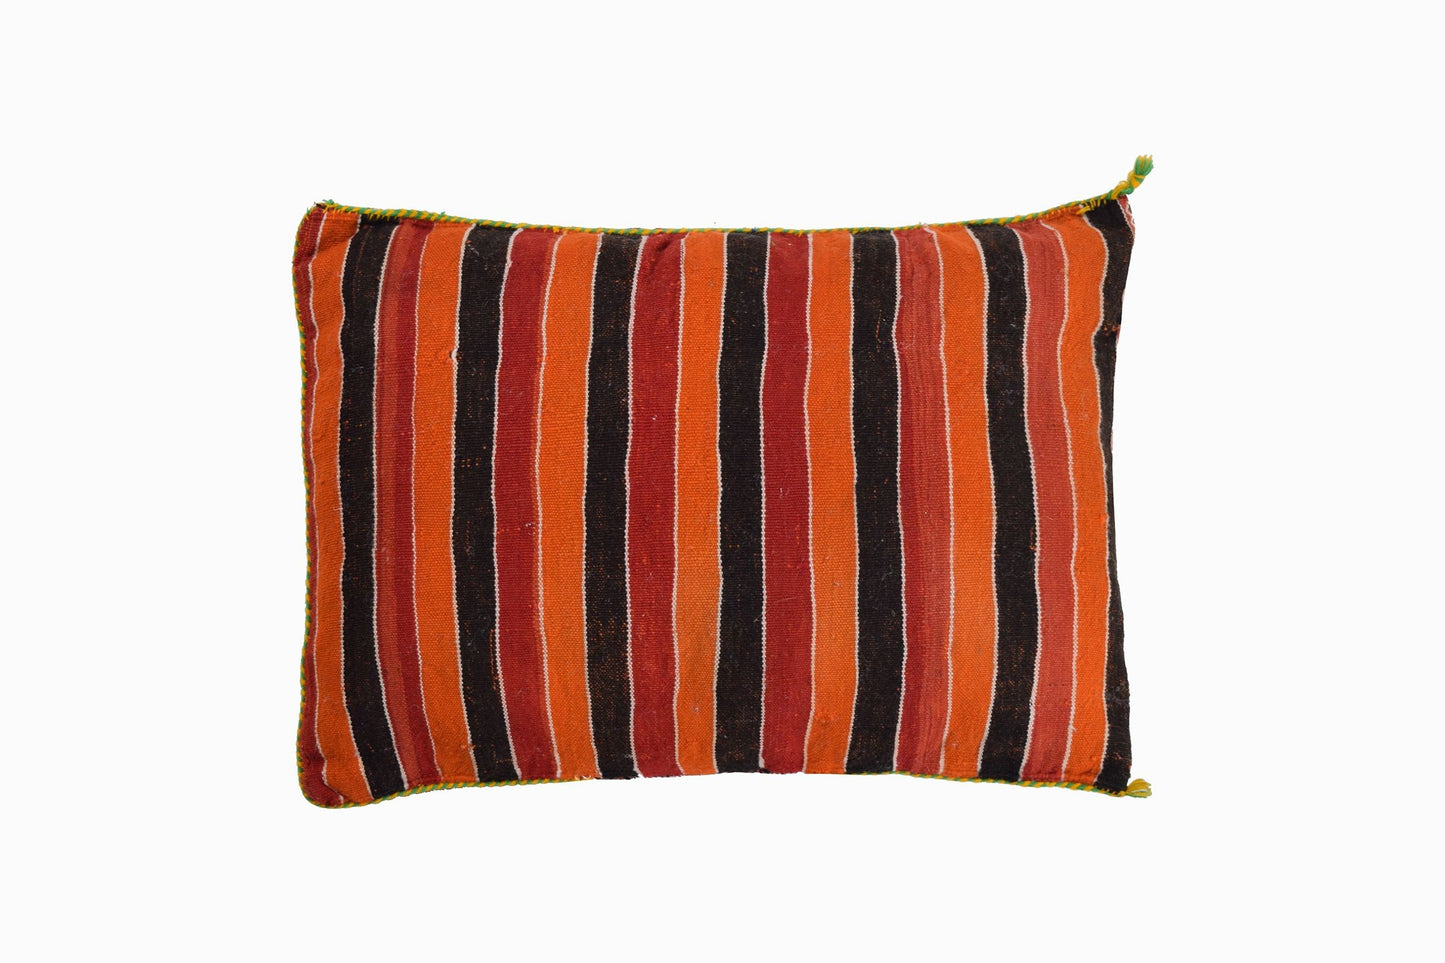 MOROCCAN EMBROIDERED CUSHION REF 6